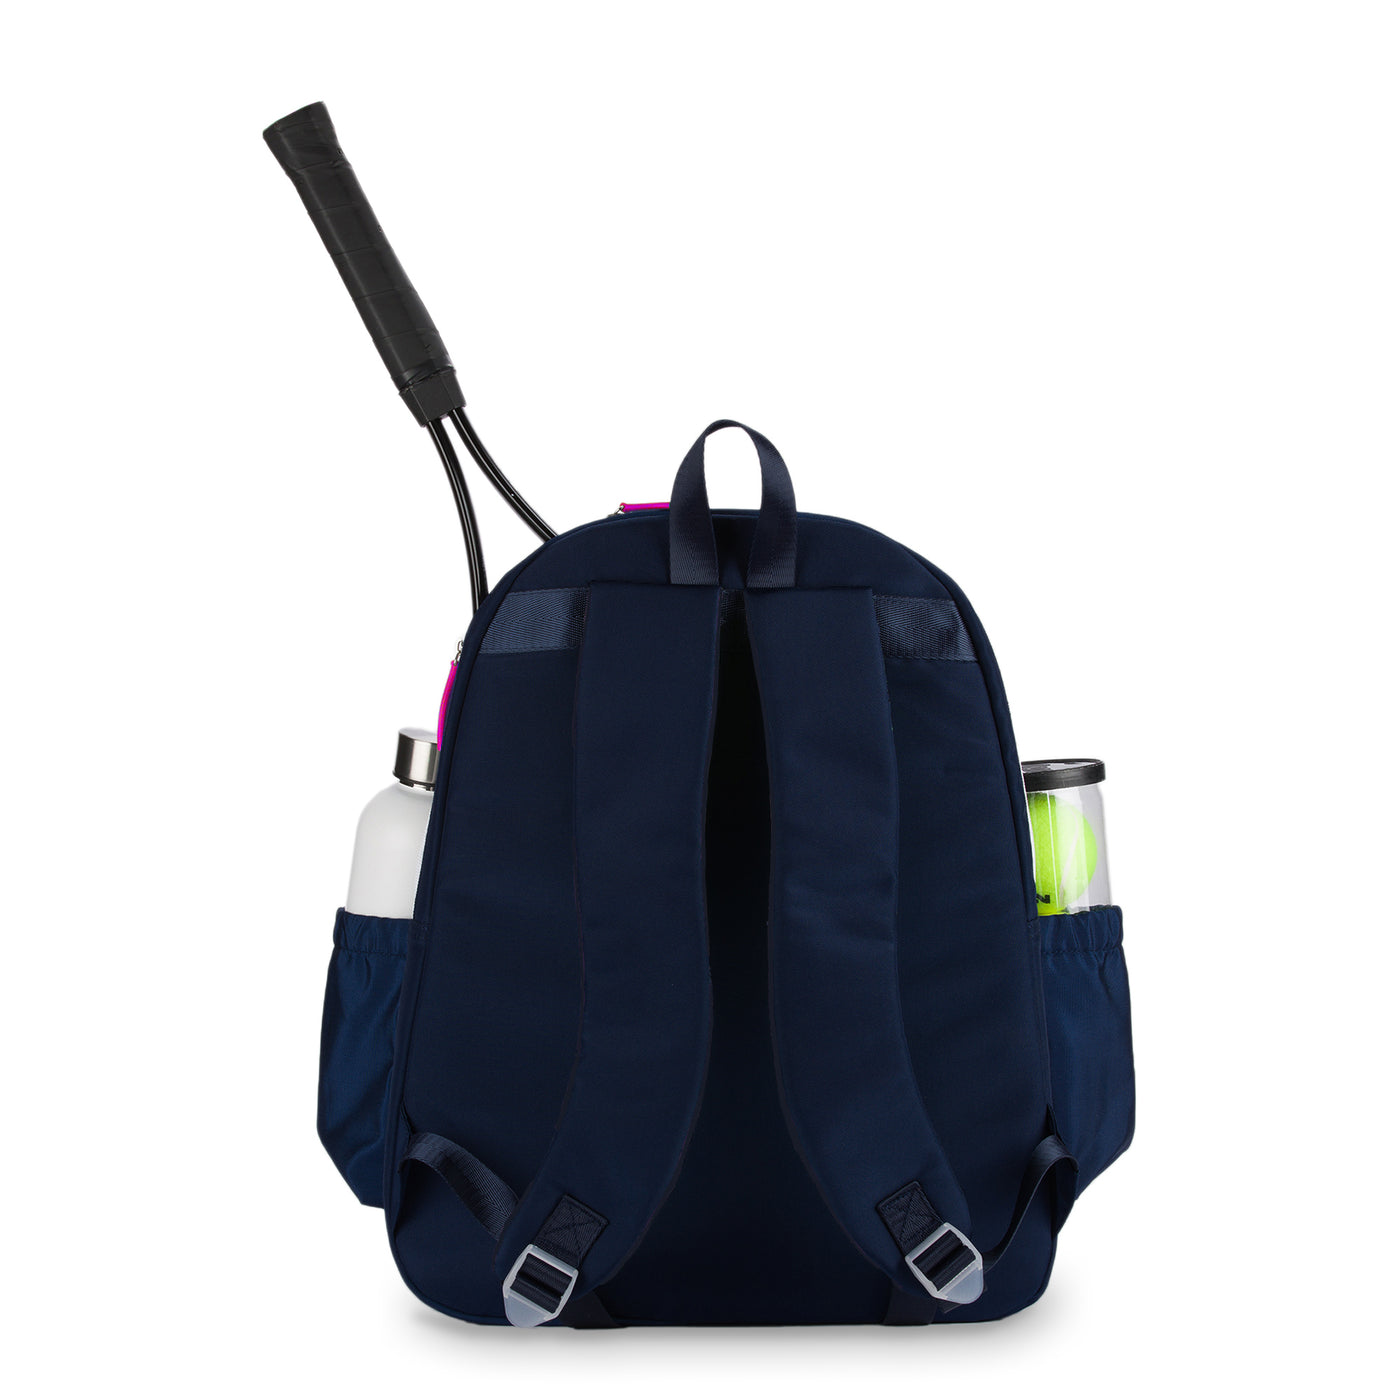 Back view of navy tennis backpack with tennis racquet held in the racquet pocket.